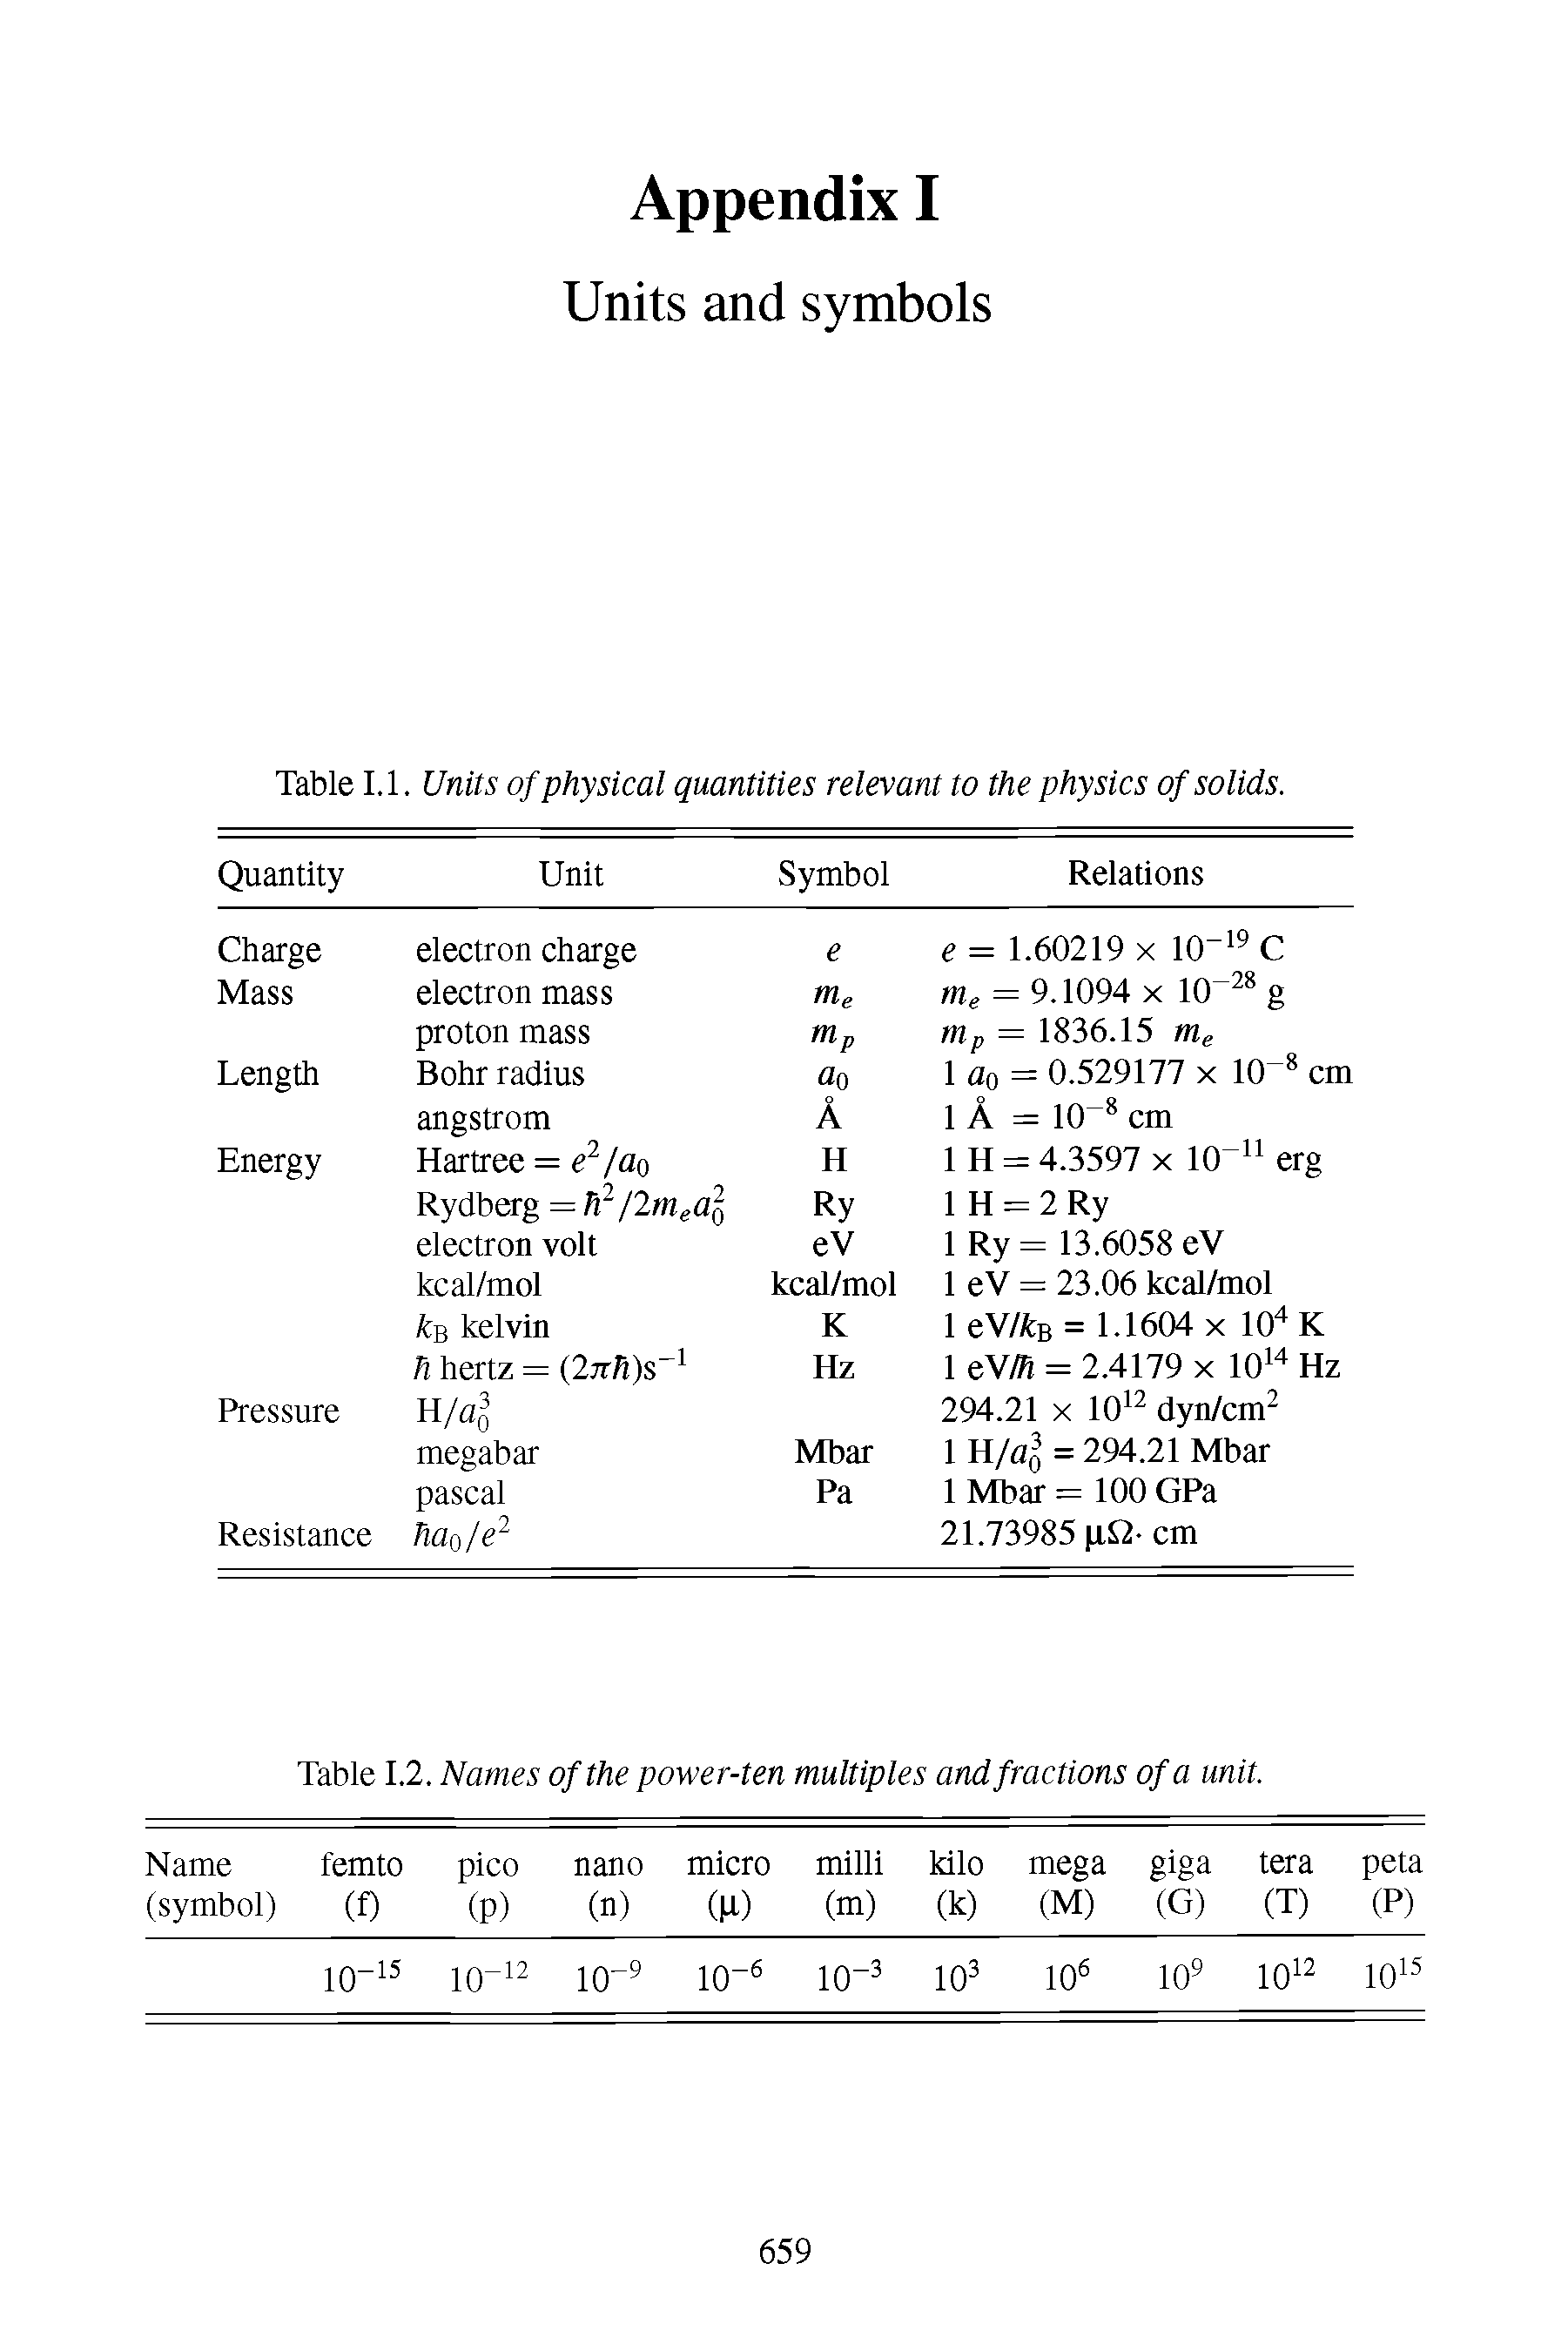 Table I.l. Units of physical quantities relevant to the physics of solids.